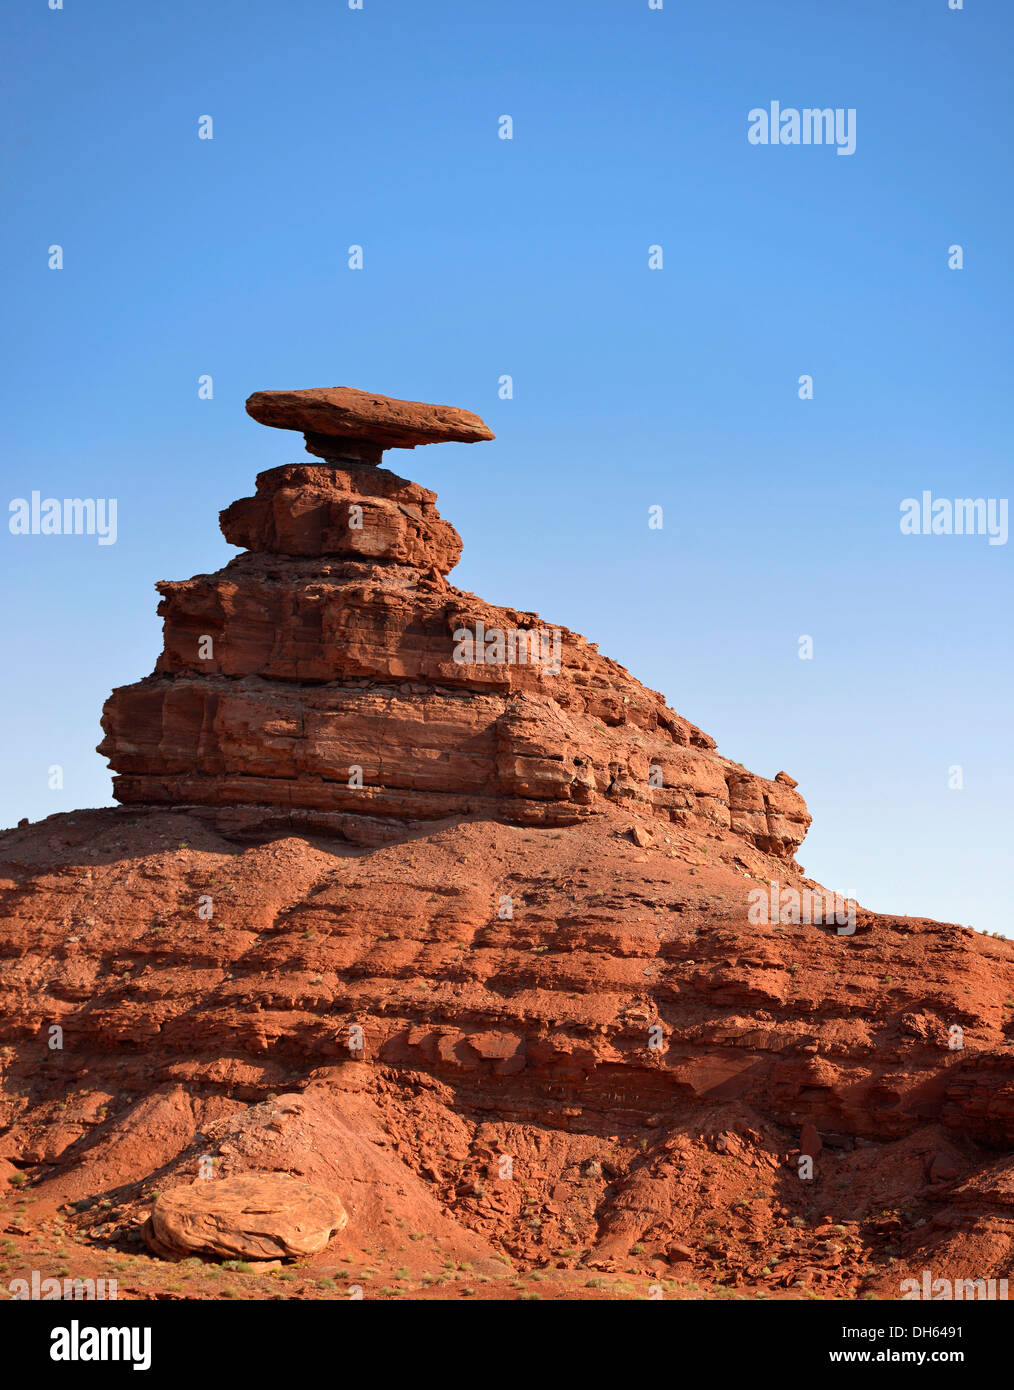 'Mexican Hat' rock formation, San Juan County, Utah, USA, sud-ouest Banque D'Images